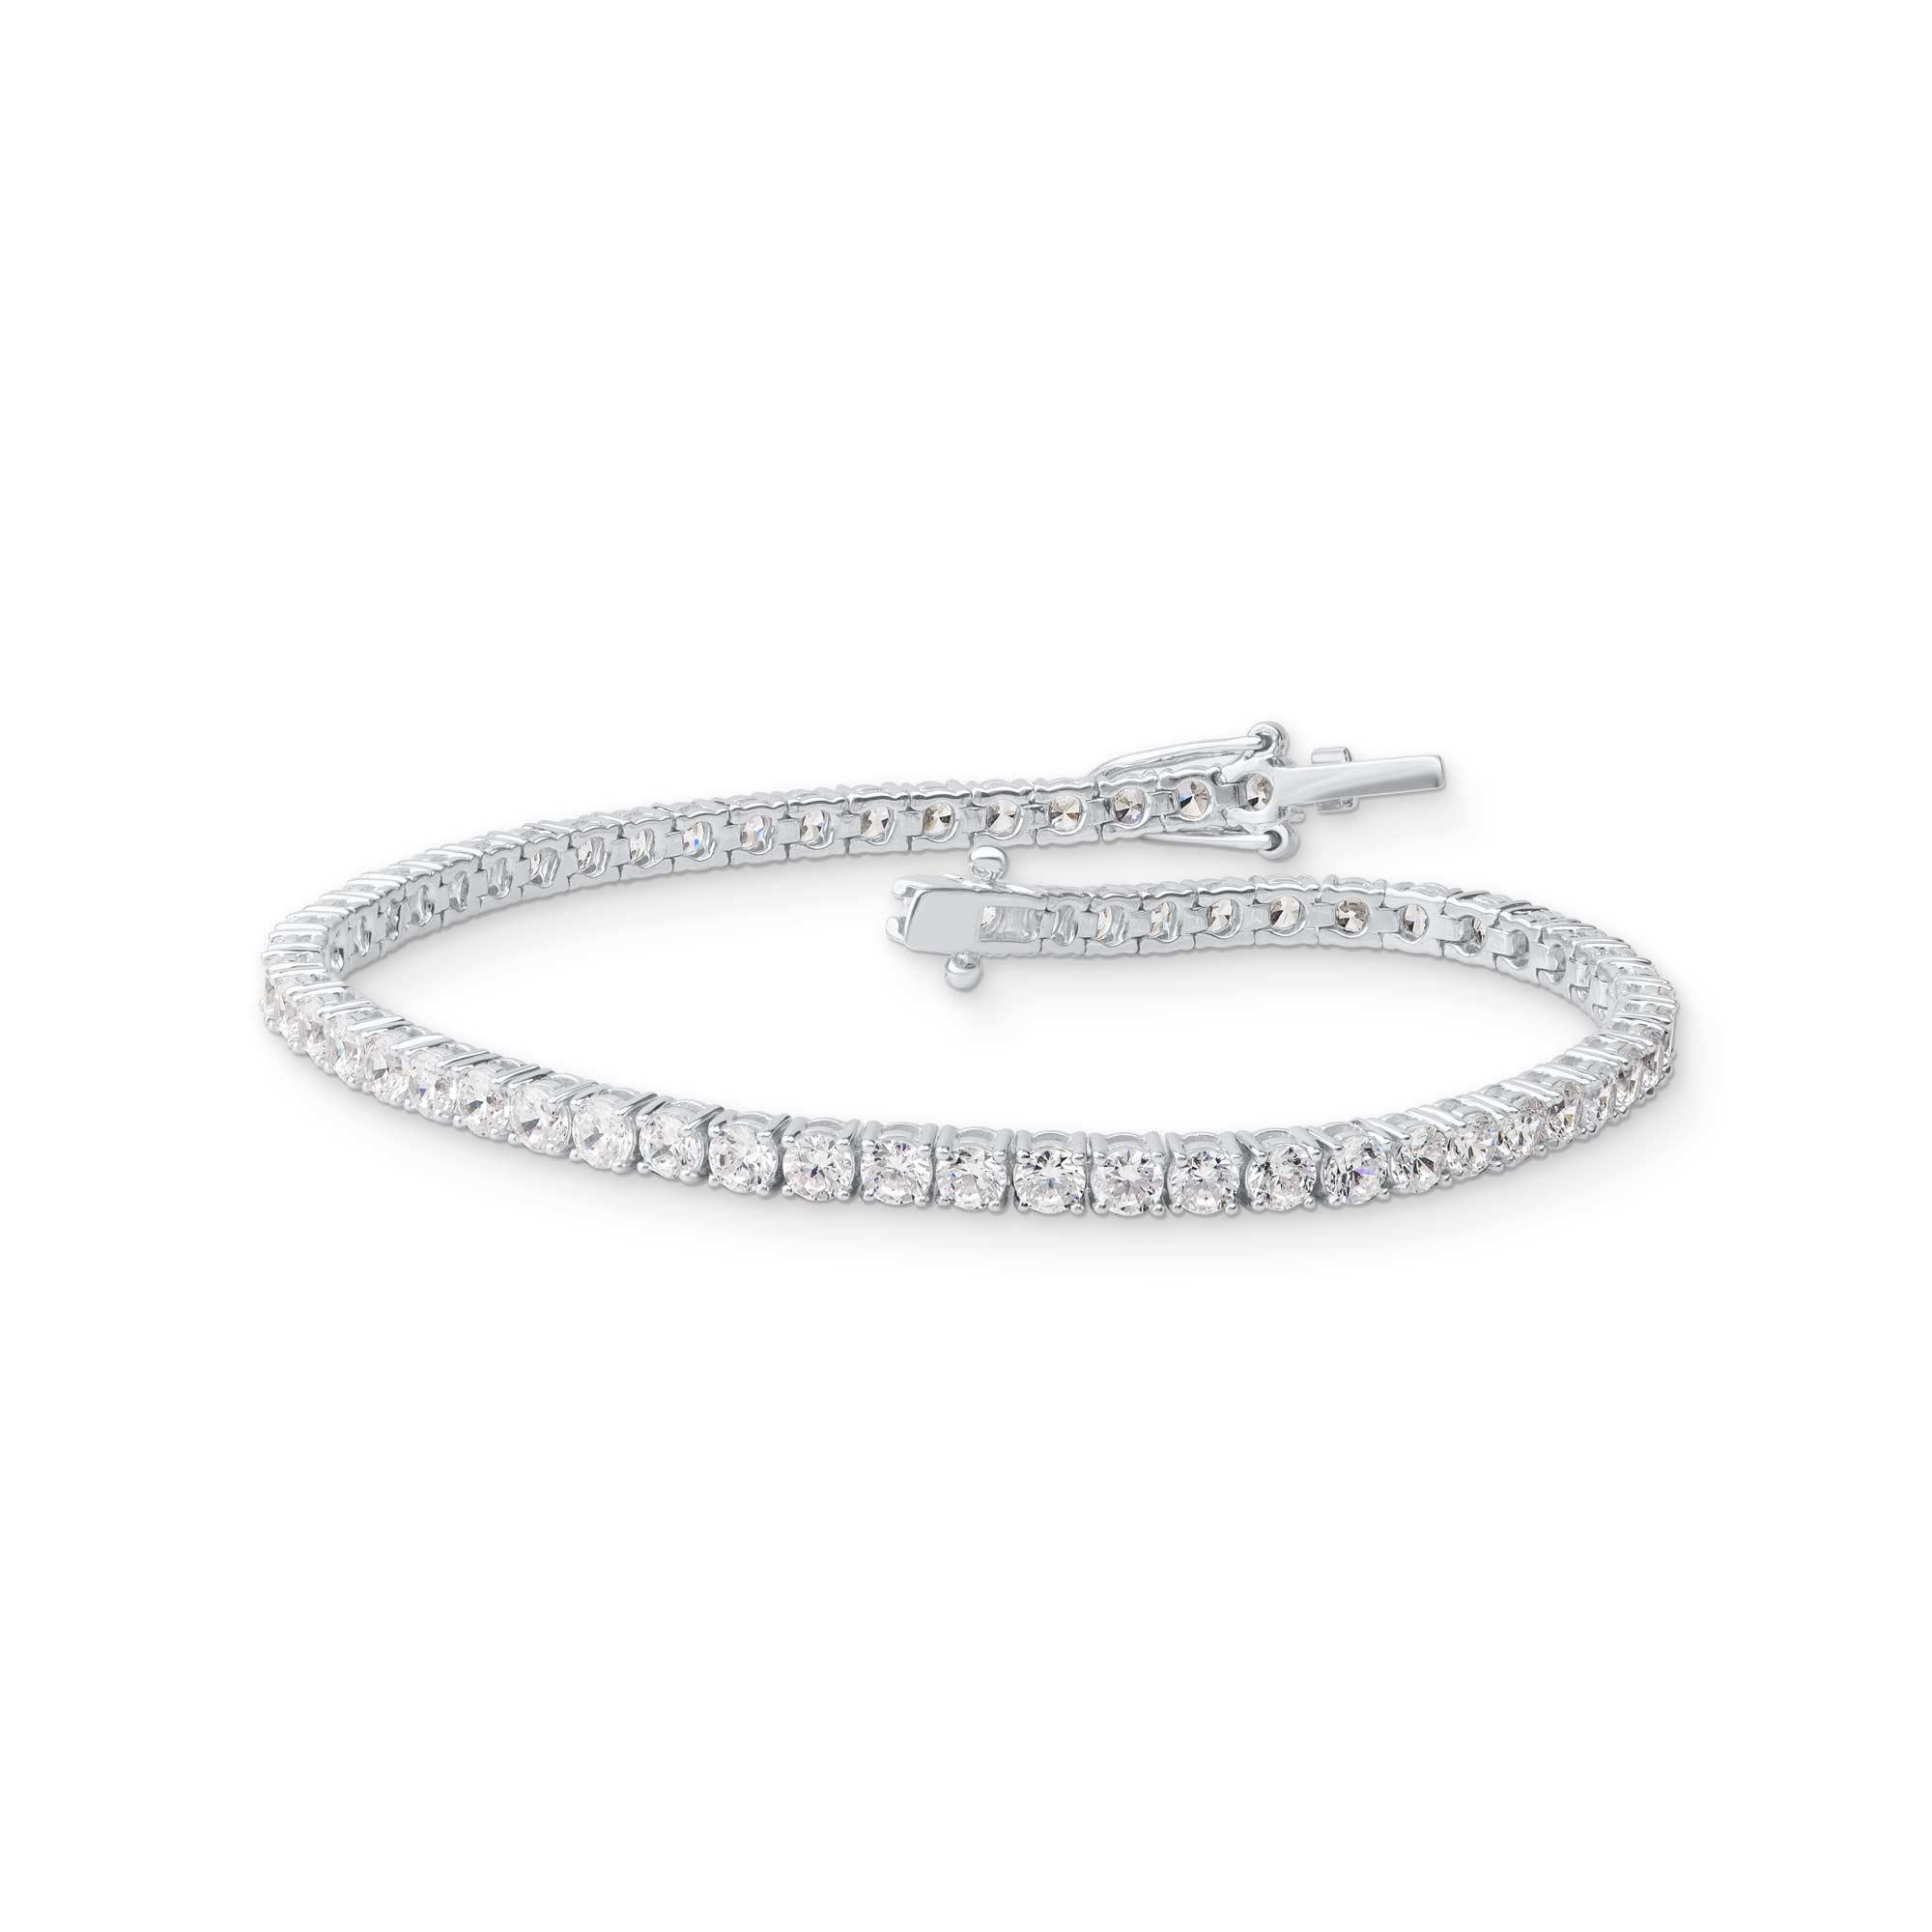 Wrap her wrist in this luxury diamond tennis bracelet. Crafted to Perfection by our inhouse experts in 14 Karat White Gold and studded with 62 round brilliant-cut diamonds in prong setting. The total weight of diamond is 5.00 Carat and it shine with